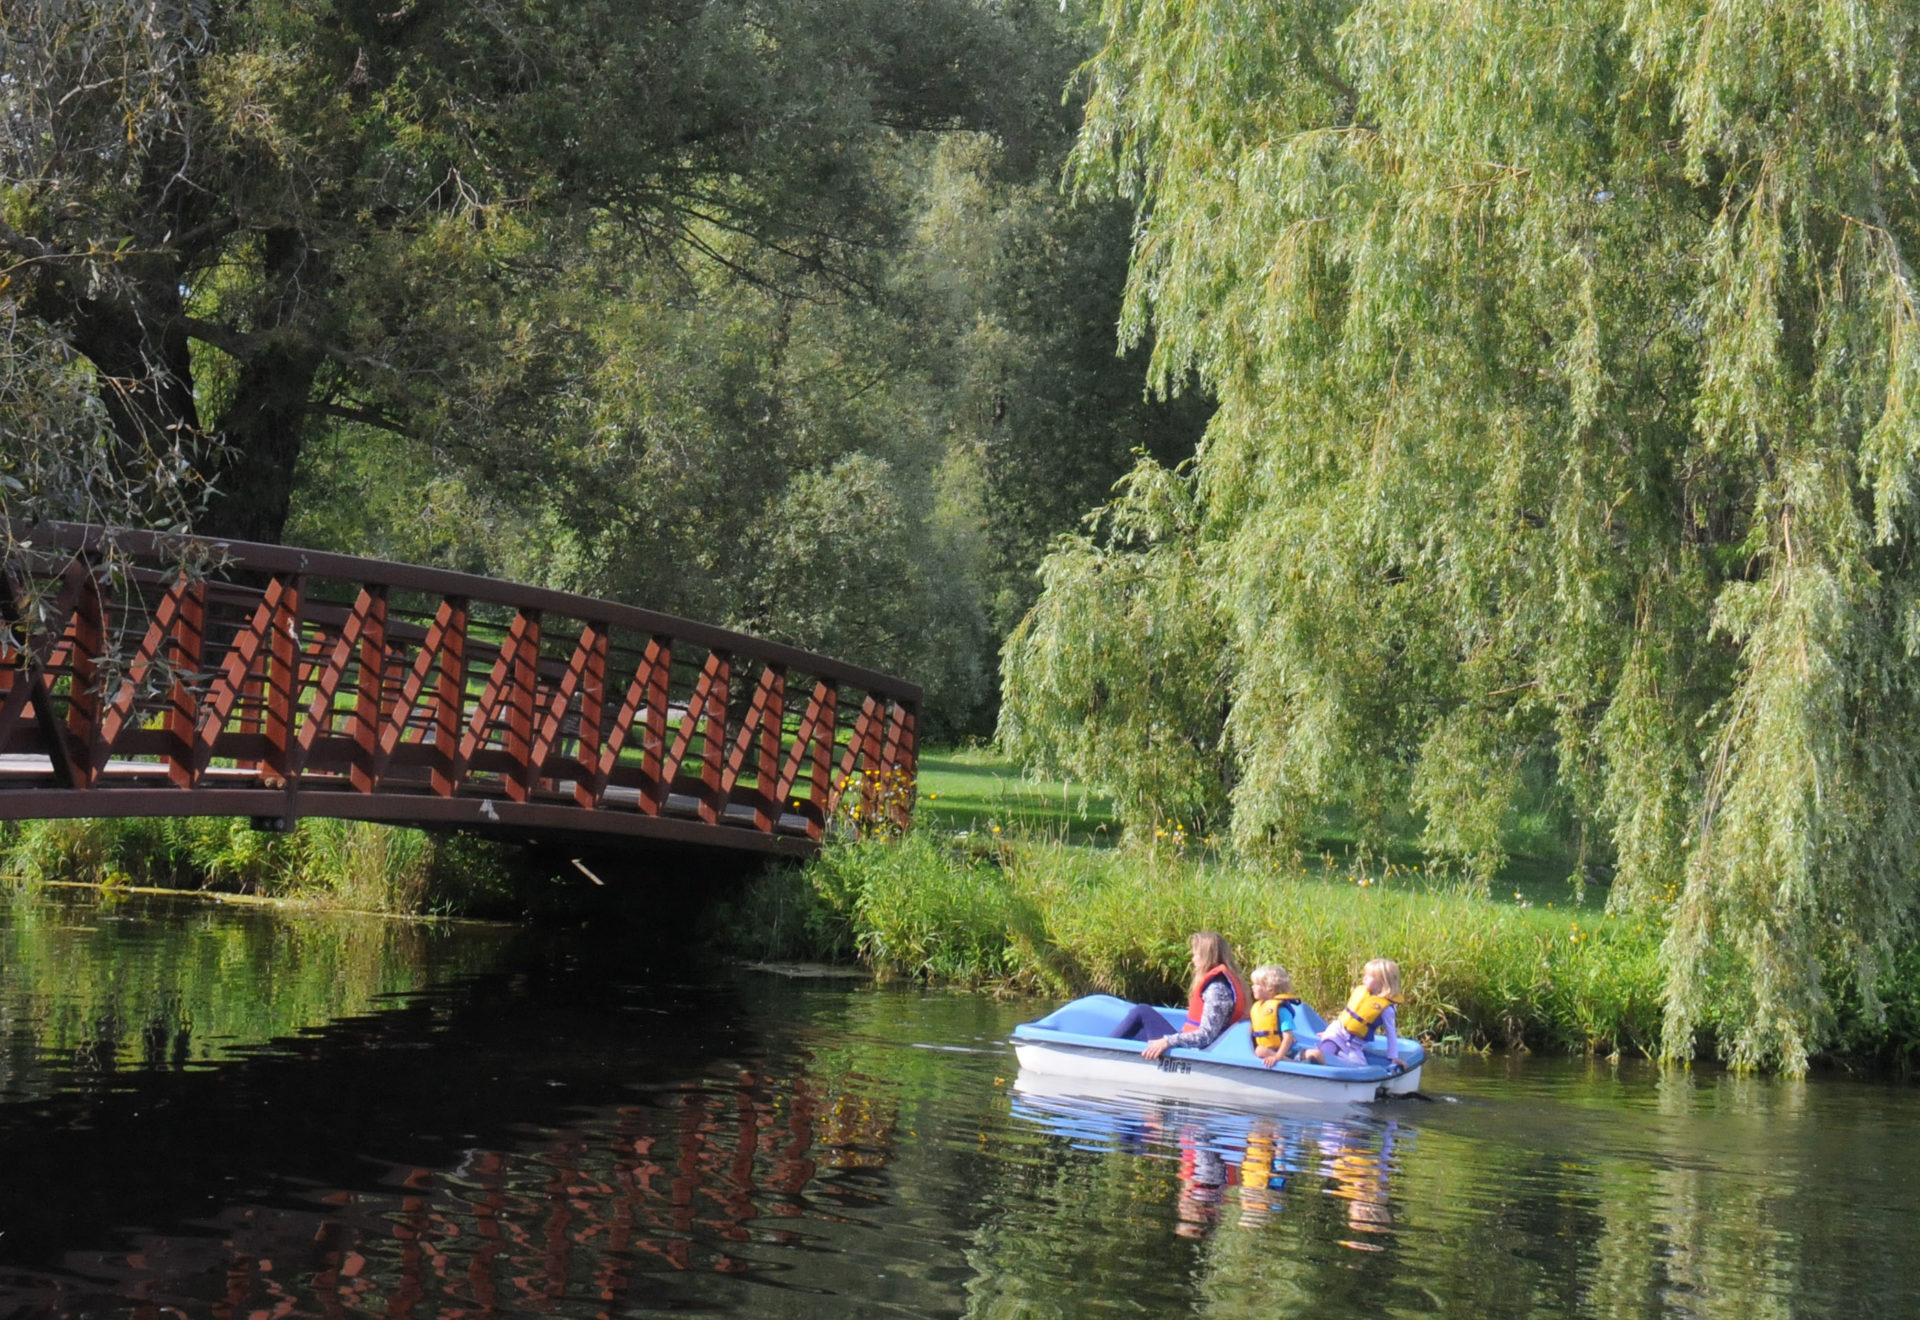 10 Reasons Why You Should Relocate to Ottawa - Paddleboat in the Dominion Arboretum